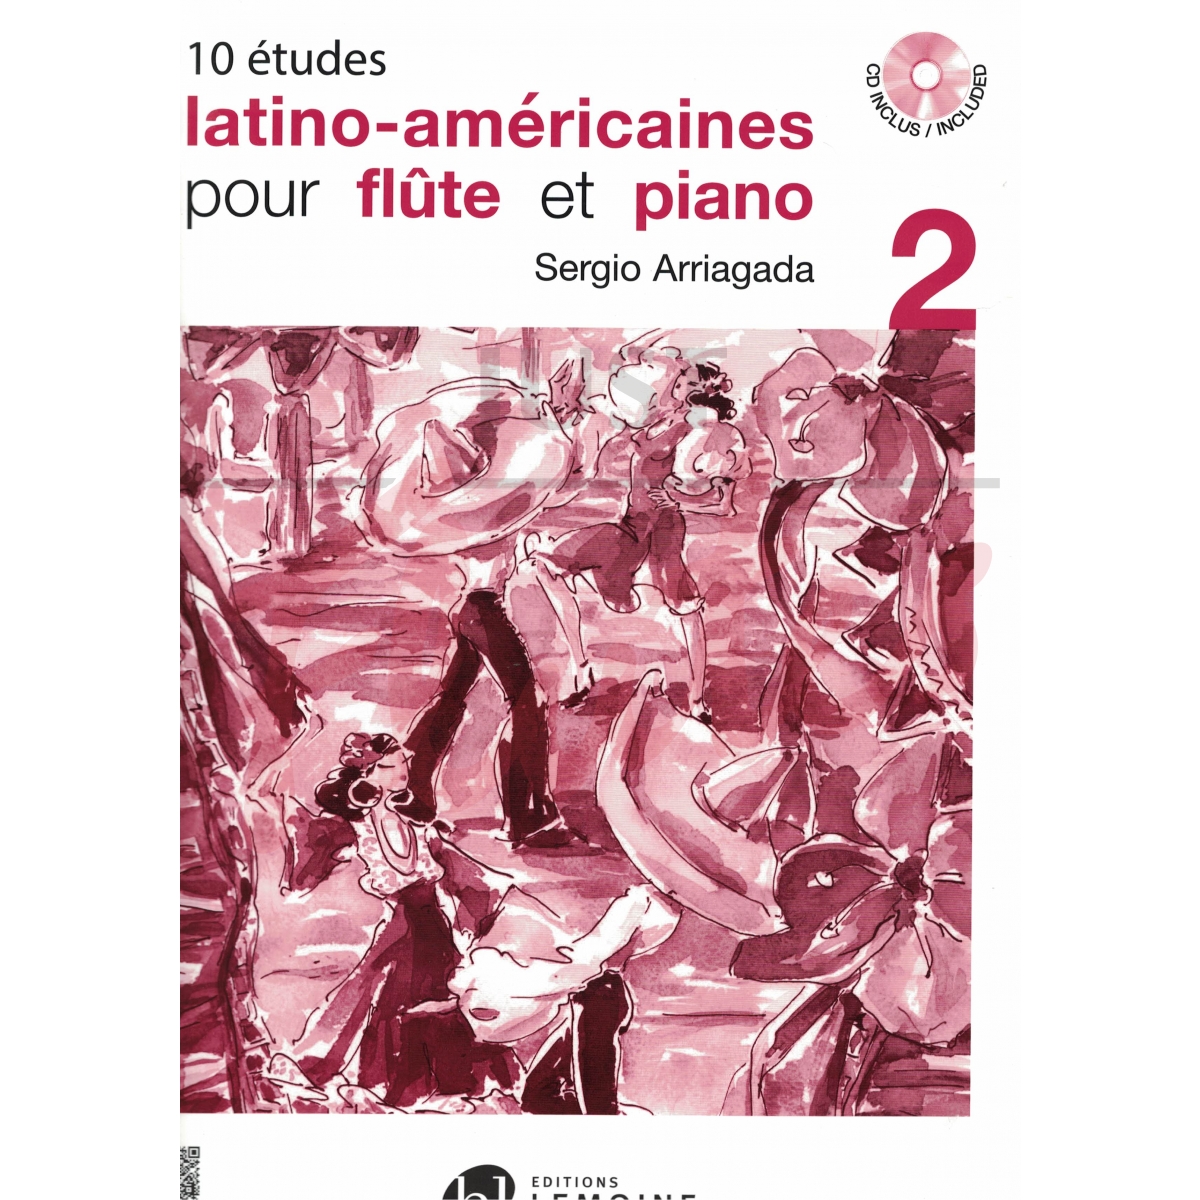 10 Latin-American Studies for Flute and Piano, Vol 2